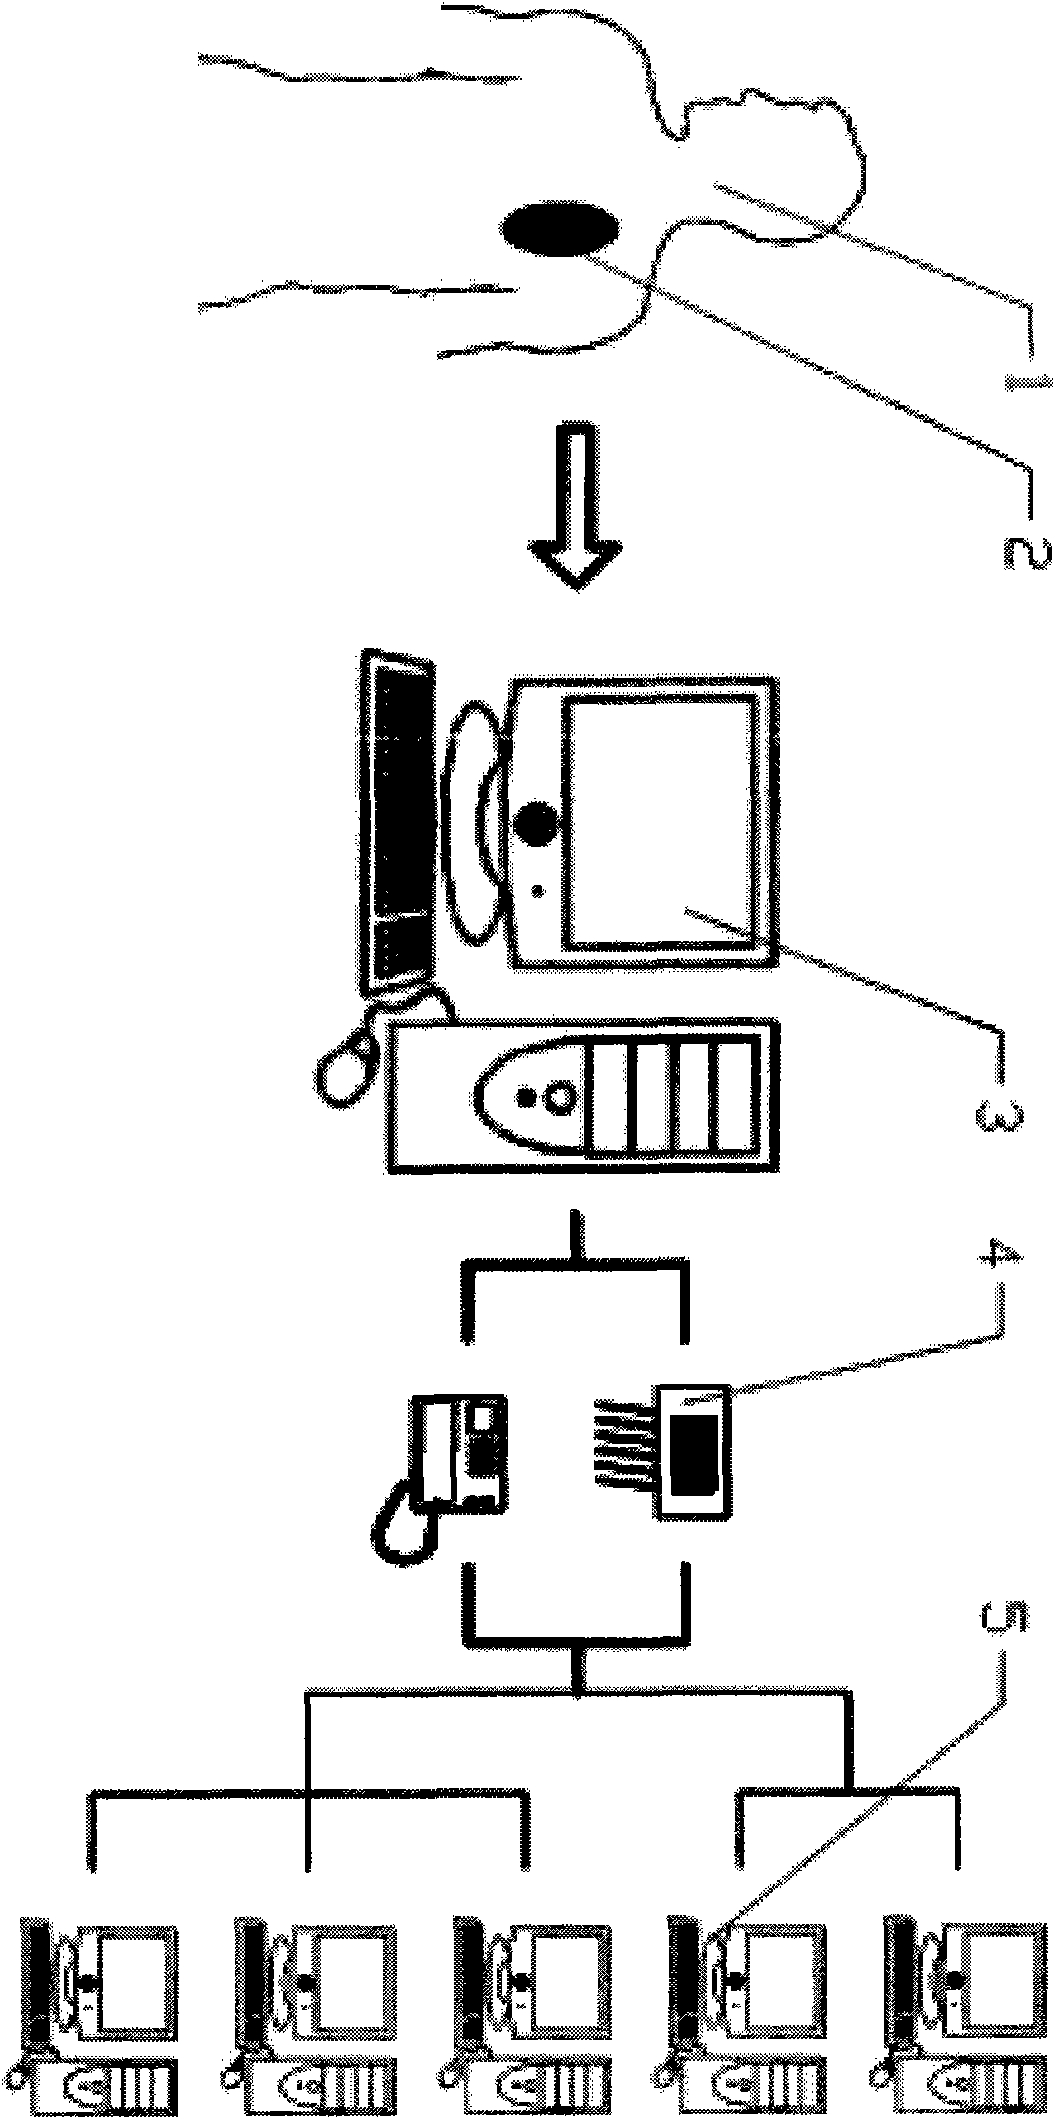 Non-invasive attached telemetering electrocardiographic recording method and system having ultra-long record period and ultra-high storage capacity